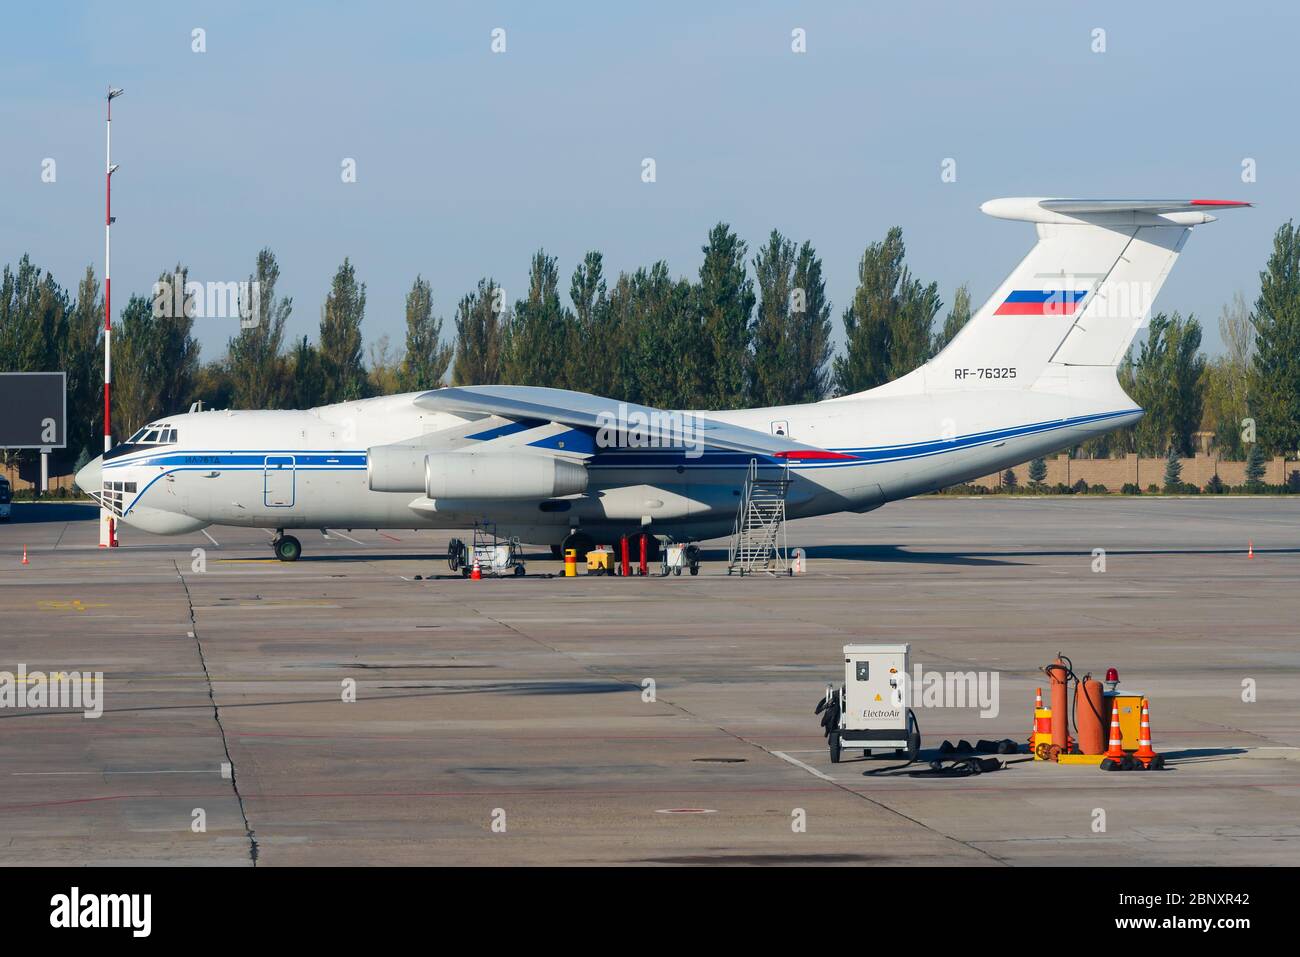 Russia Federal Border Guards Aviation Command Ilyushin 76 (Il-76) at Manas Airport in Kyrgyzstan. Russian soviet cargo aircraft RT-76325, Stock Photo